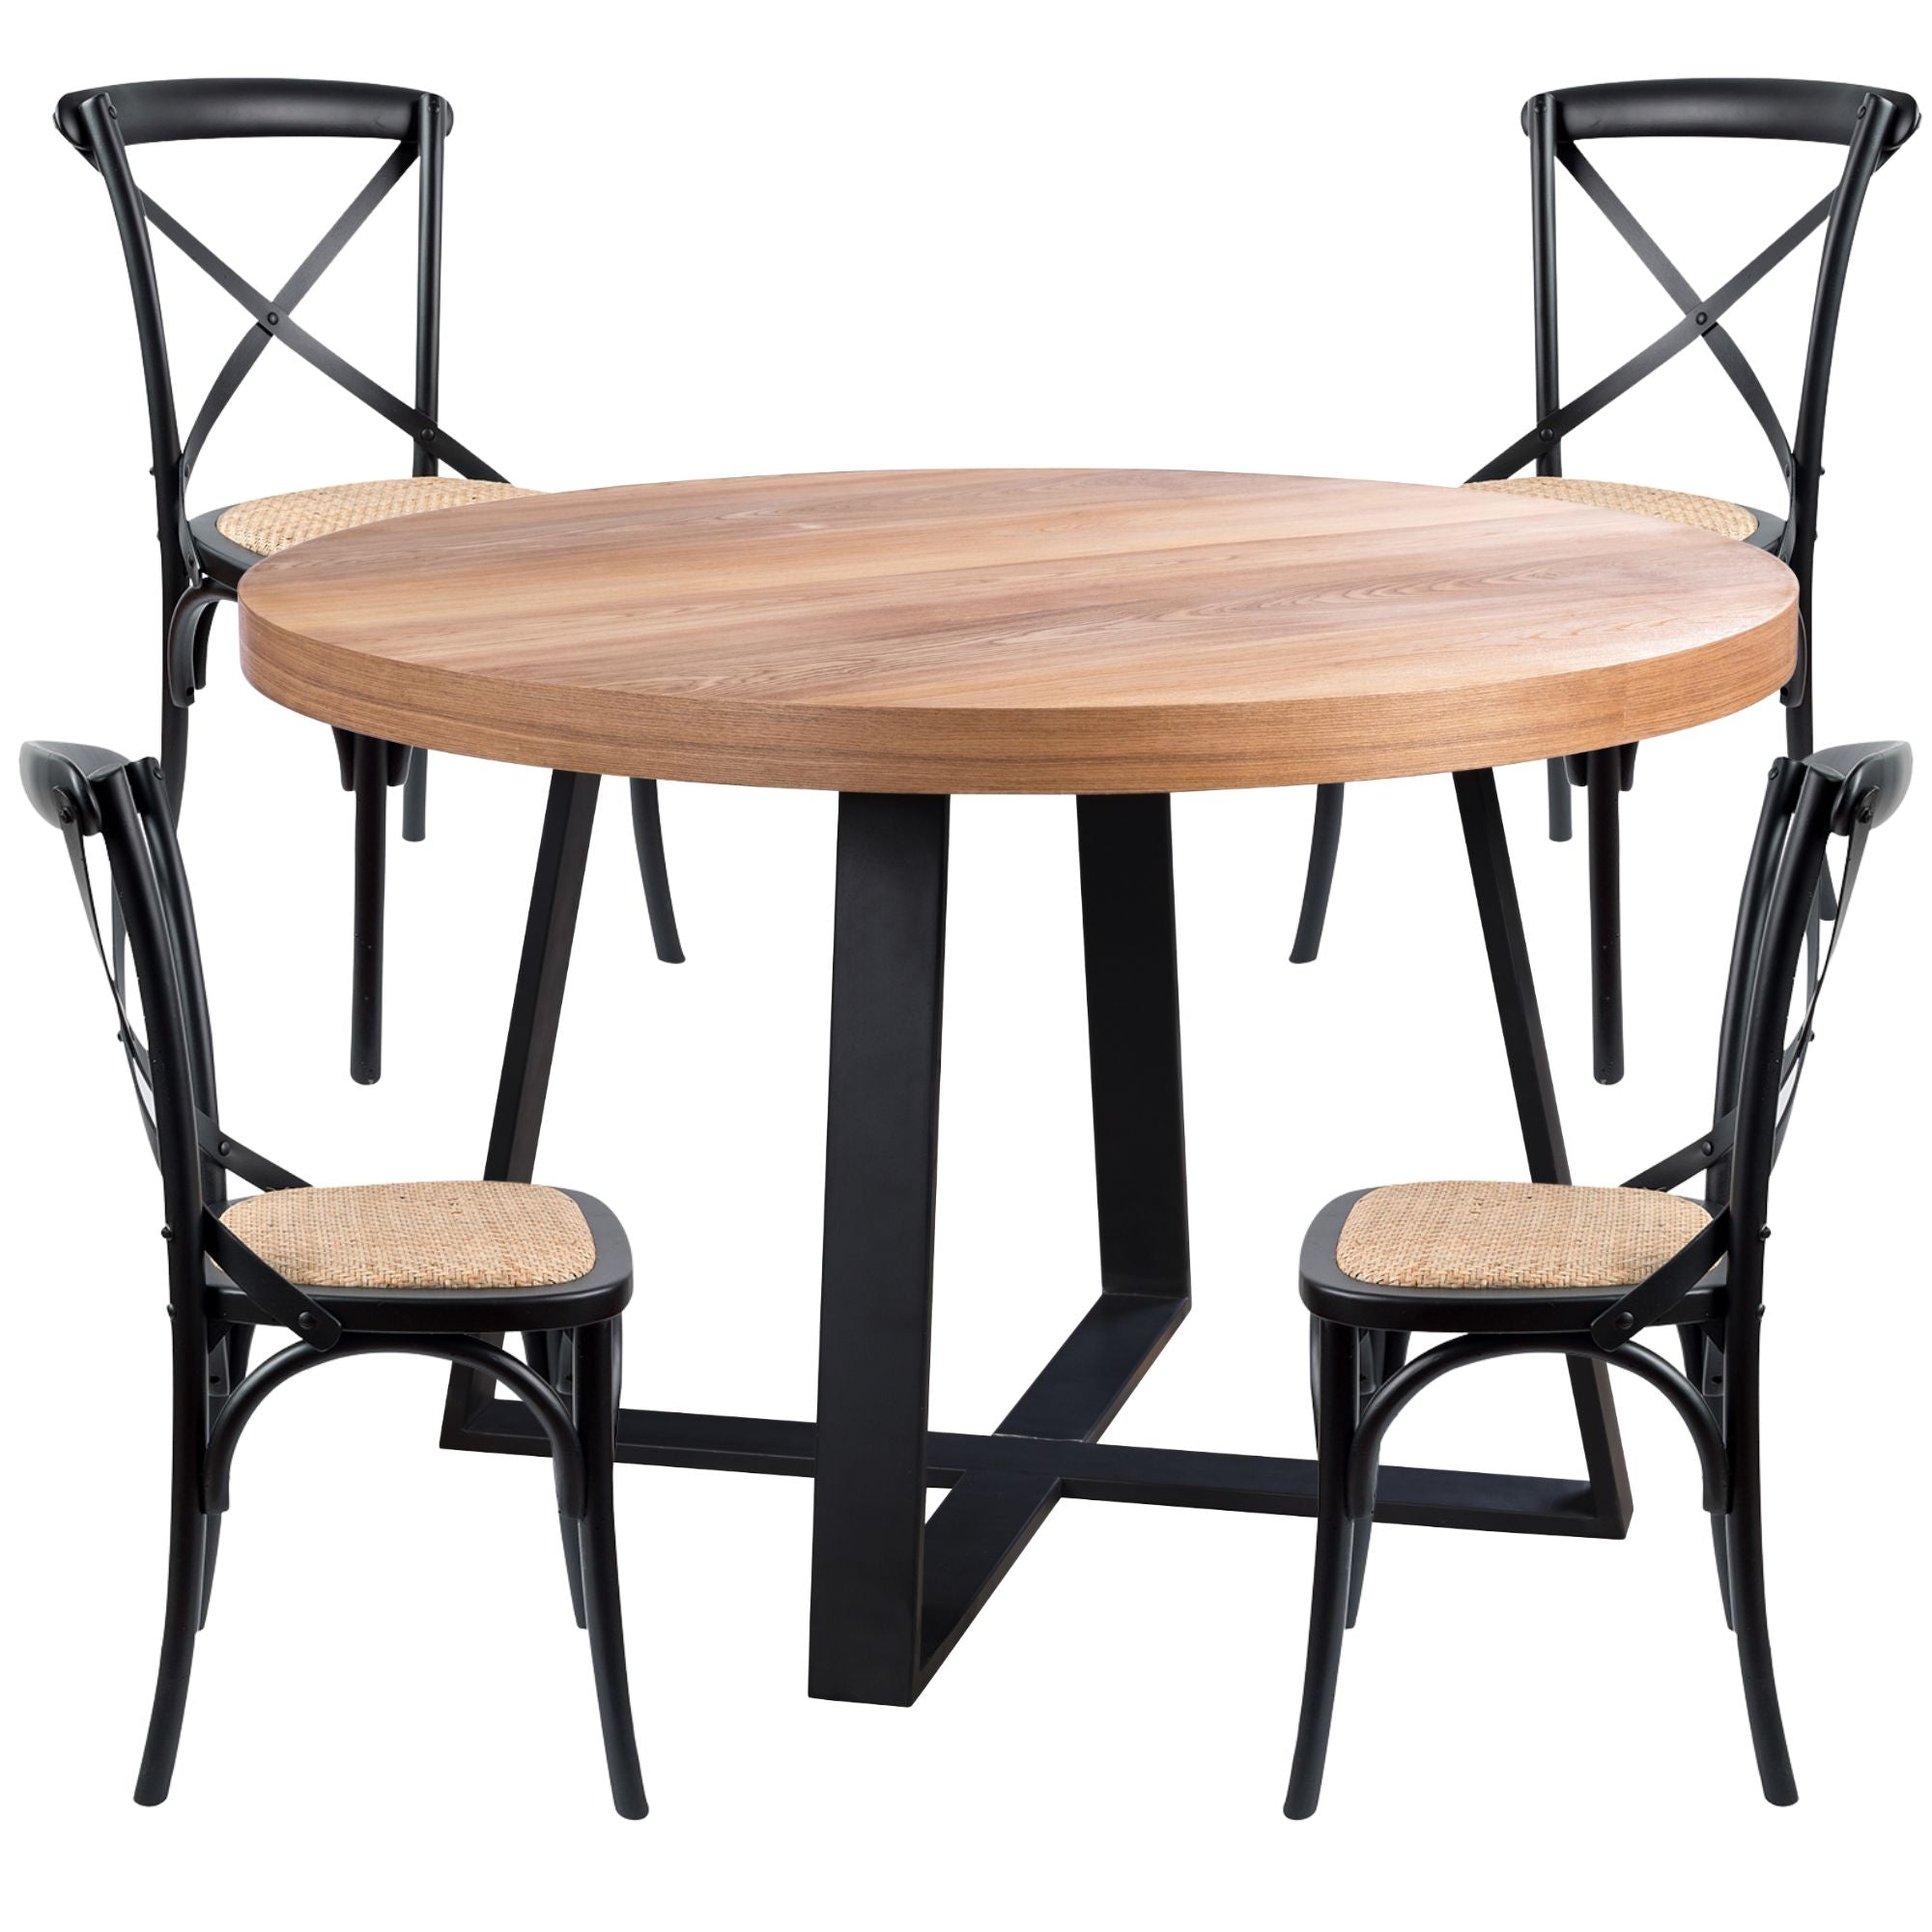 Petunia  5pc 120cm Round Dining Table Set 4 Cross Back Chair Elm Timber Wood